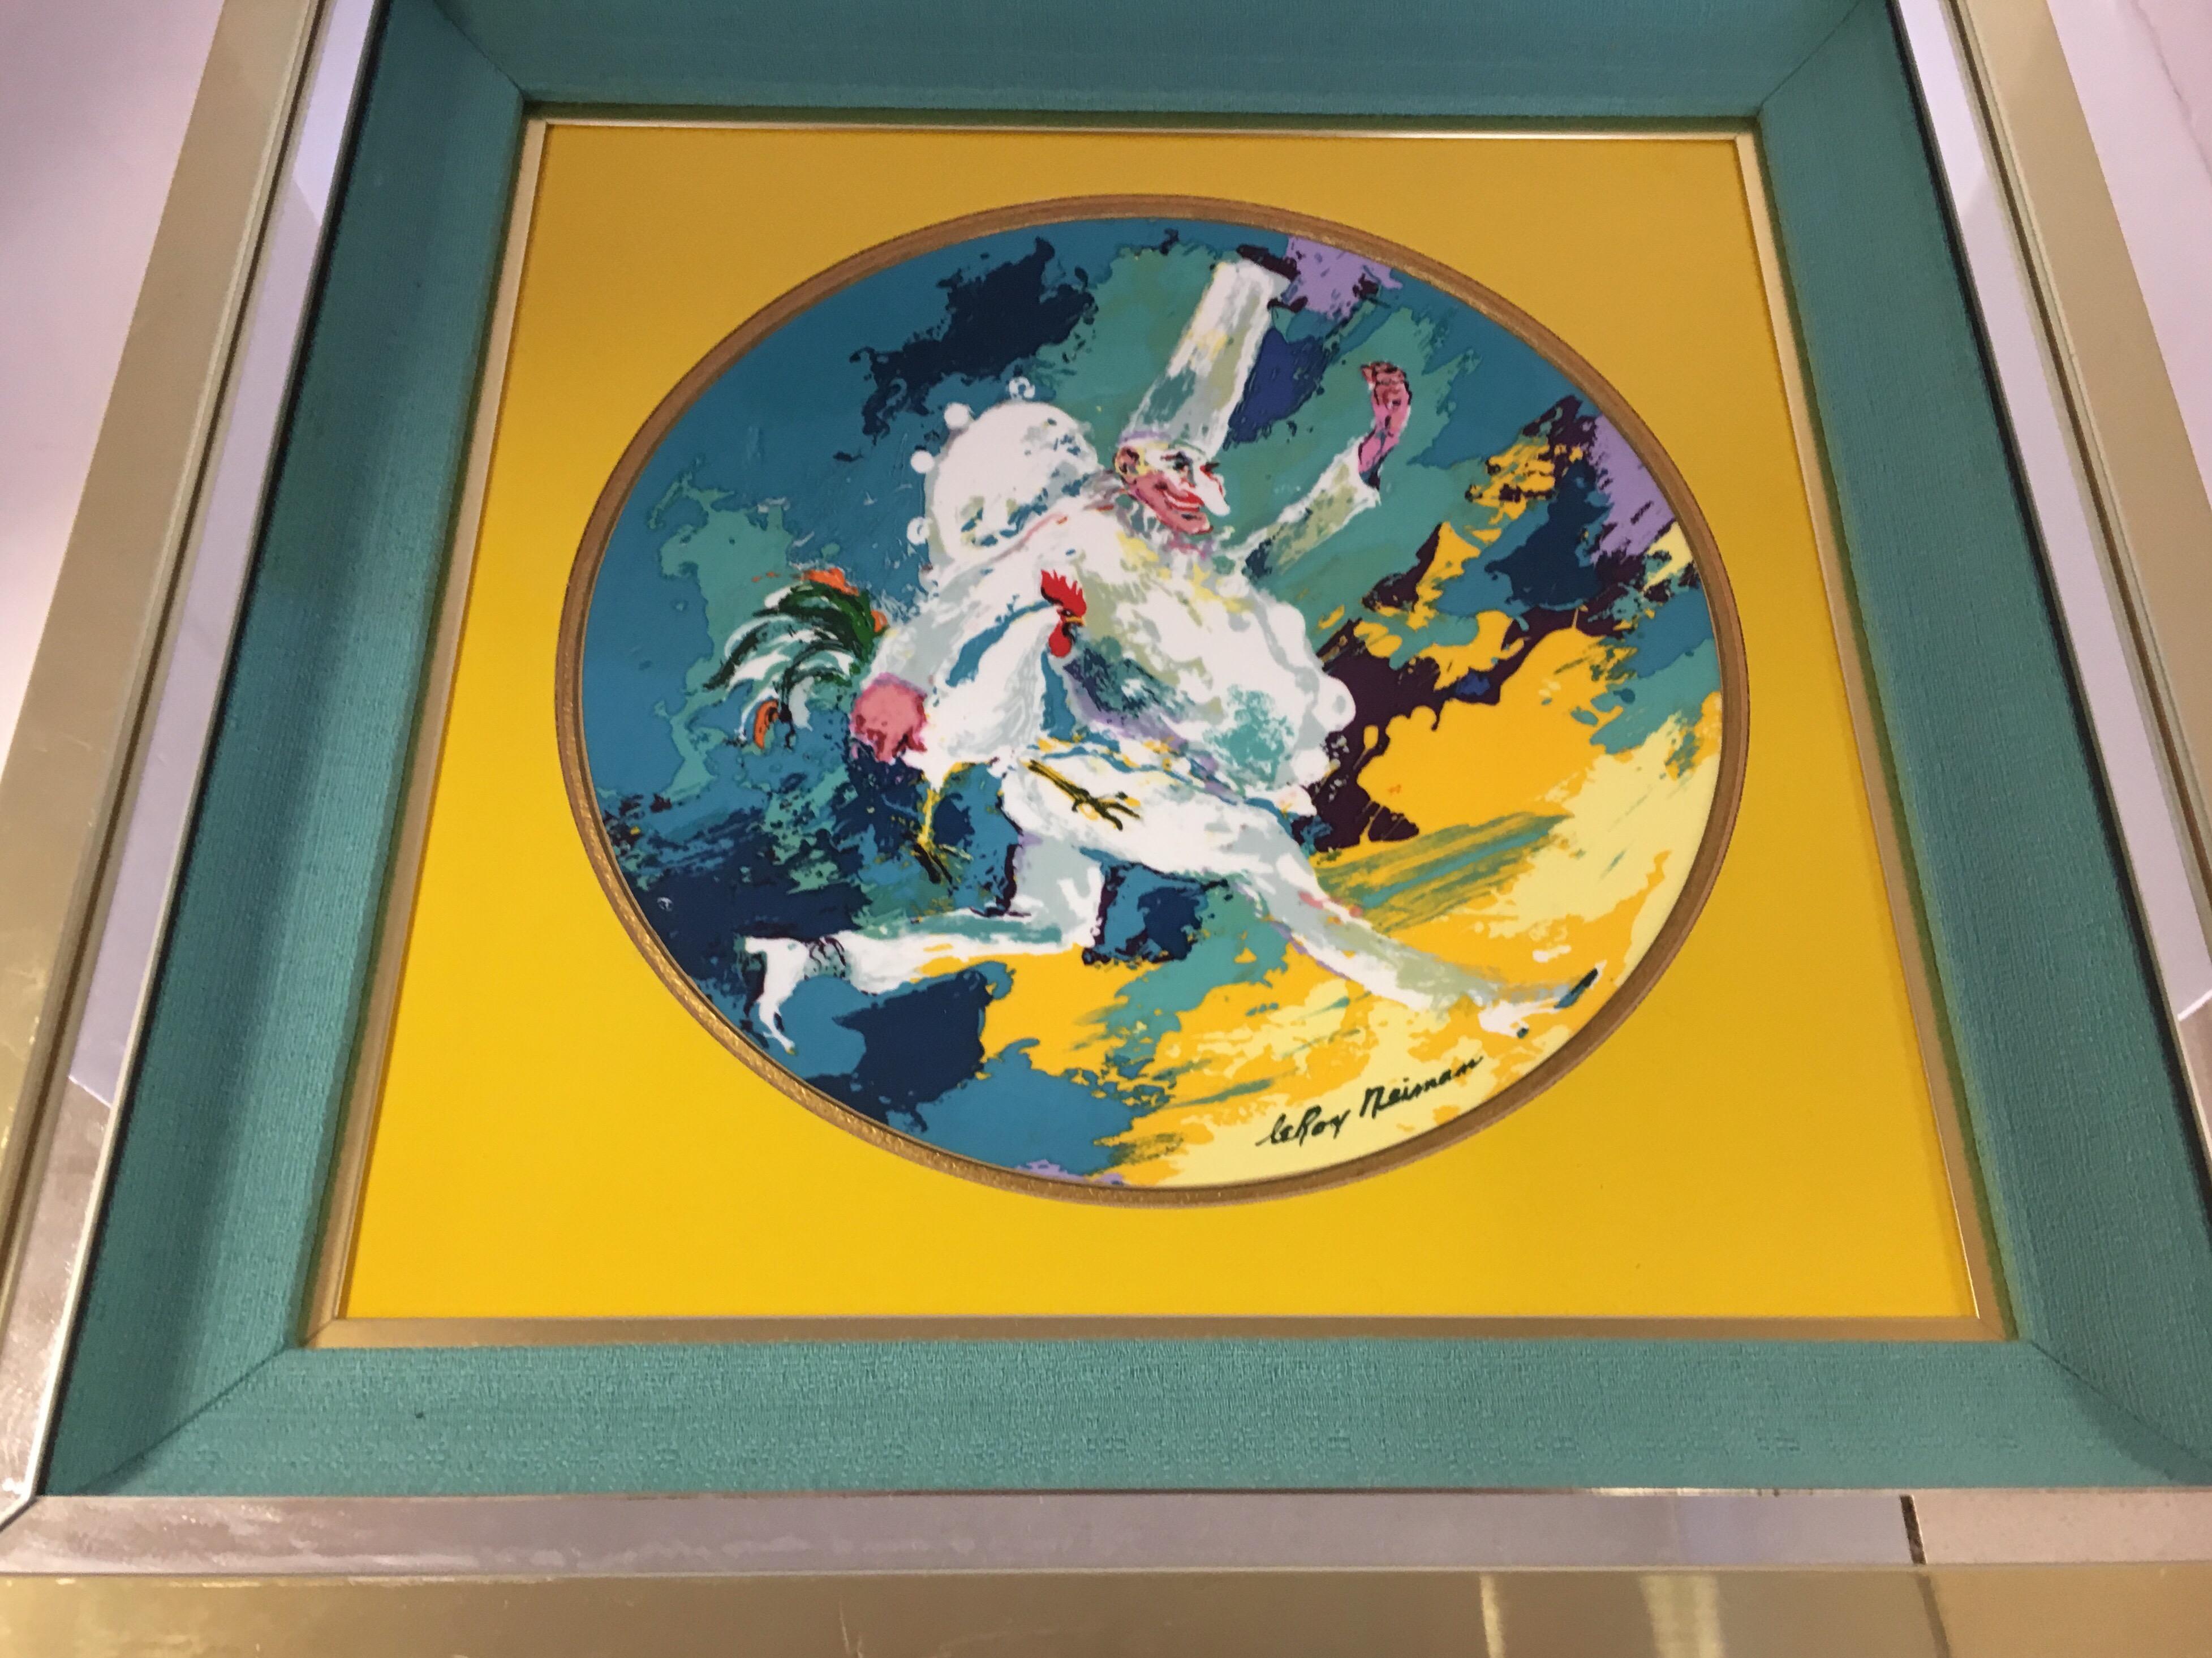 Mid-Century Modern Leroy Neiman Limited Edition Royal Doulton Punchinello 1978 Framed Artwork Plate